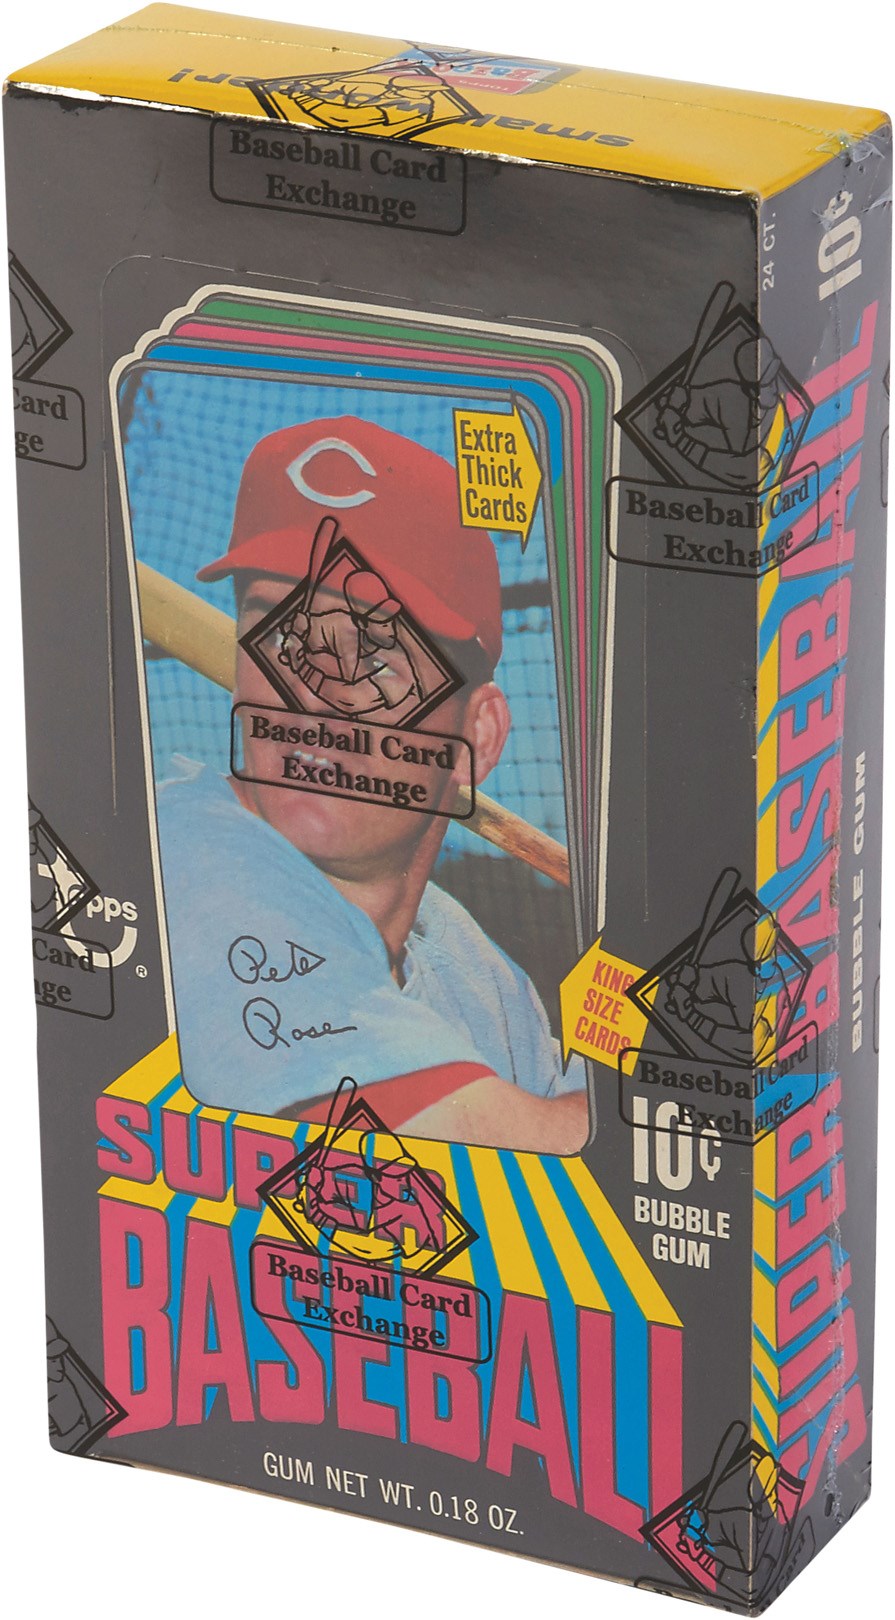 Baseball and Trading Cards - 1970 Topps Super Baseball Wax Box (24 Unopened Packs) - BBCE Wrapped